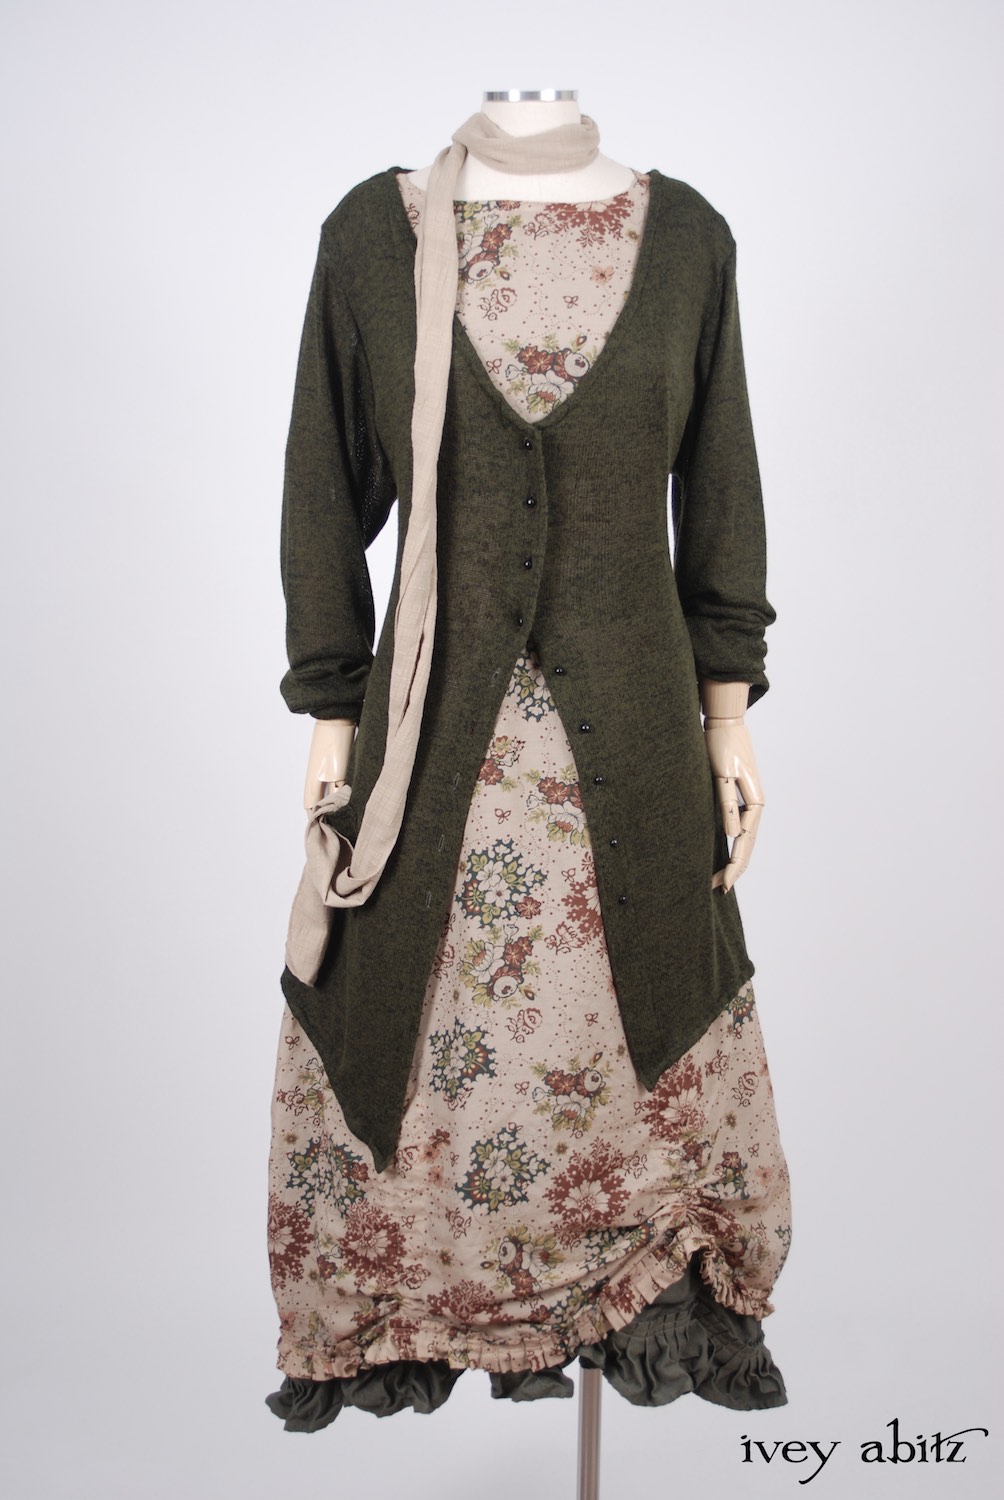 Ivey Abitz - Blanchefleur Sash in Blushed Plaid Voile  - Fairholme Jacket in Morning Meadow/Blackbird Softest Knit - Montmorency Frock in Blushed Meadow Floral Voile, High Water Length - Edenshire Frock in Morning Meadow Yarn Dyed Cotton, Low Water Length